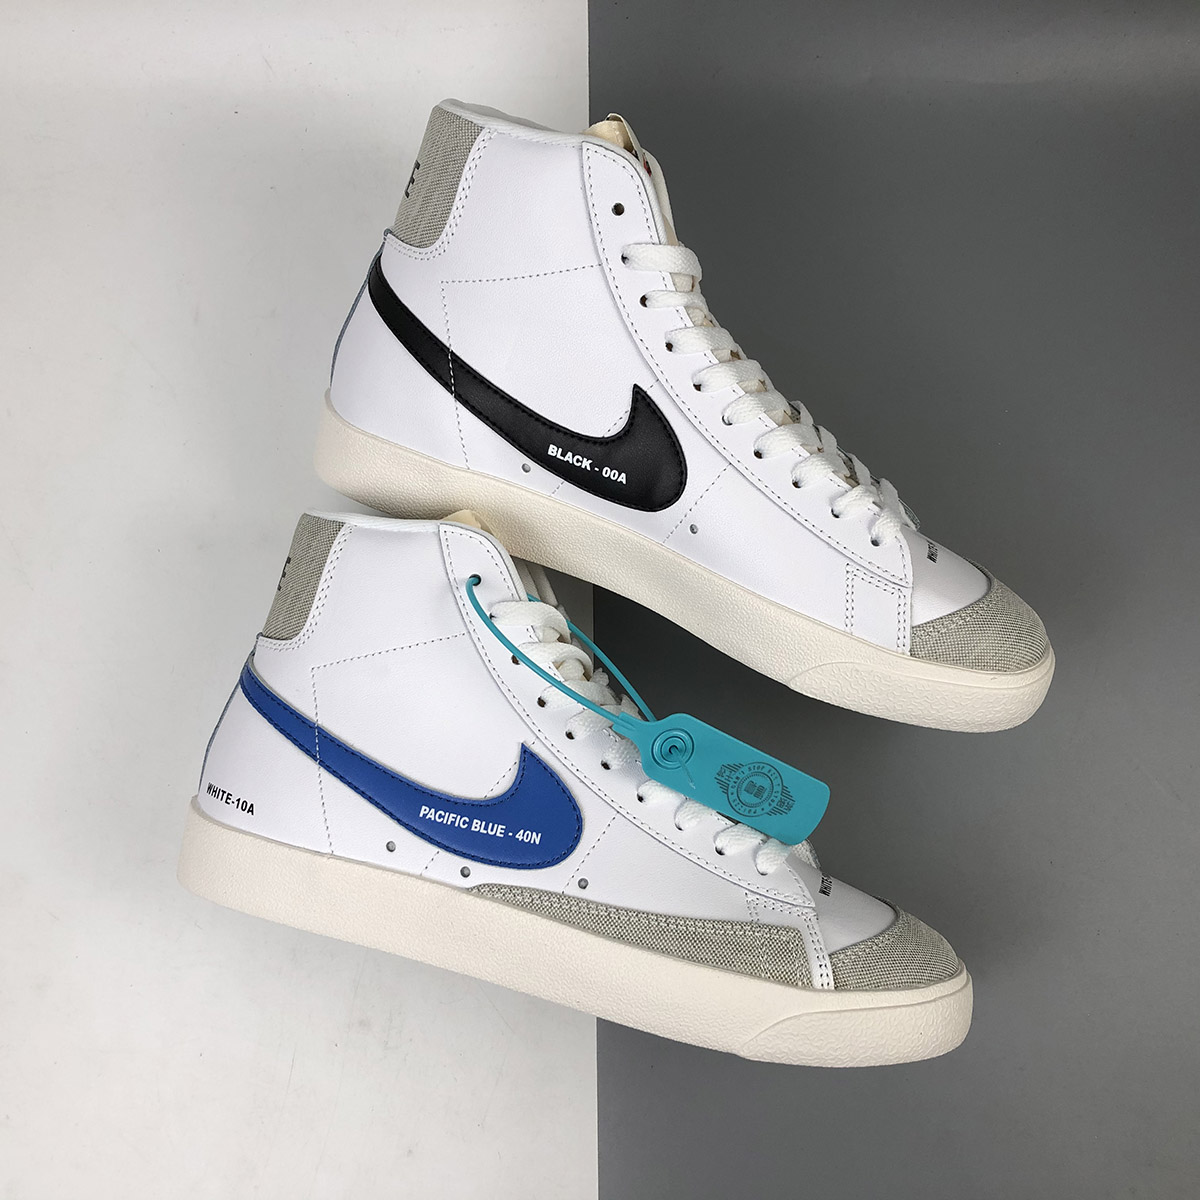 Nike Blazer Mid ’77 “Color Code” White For Sale – The Sole Line